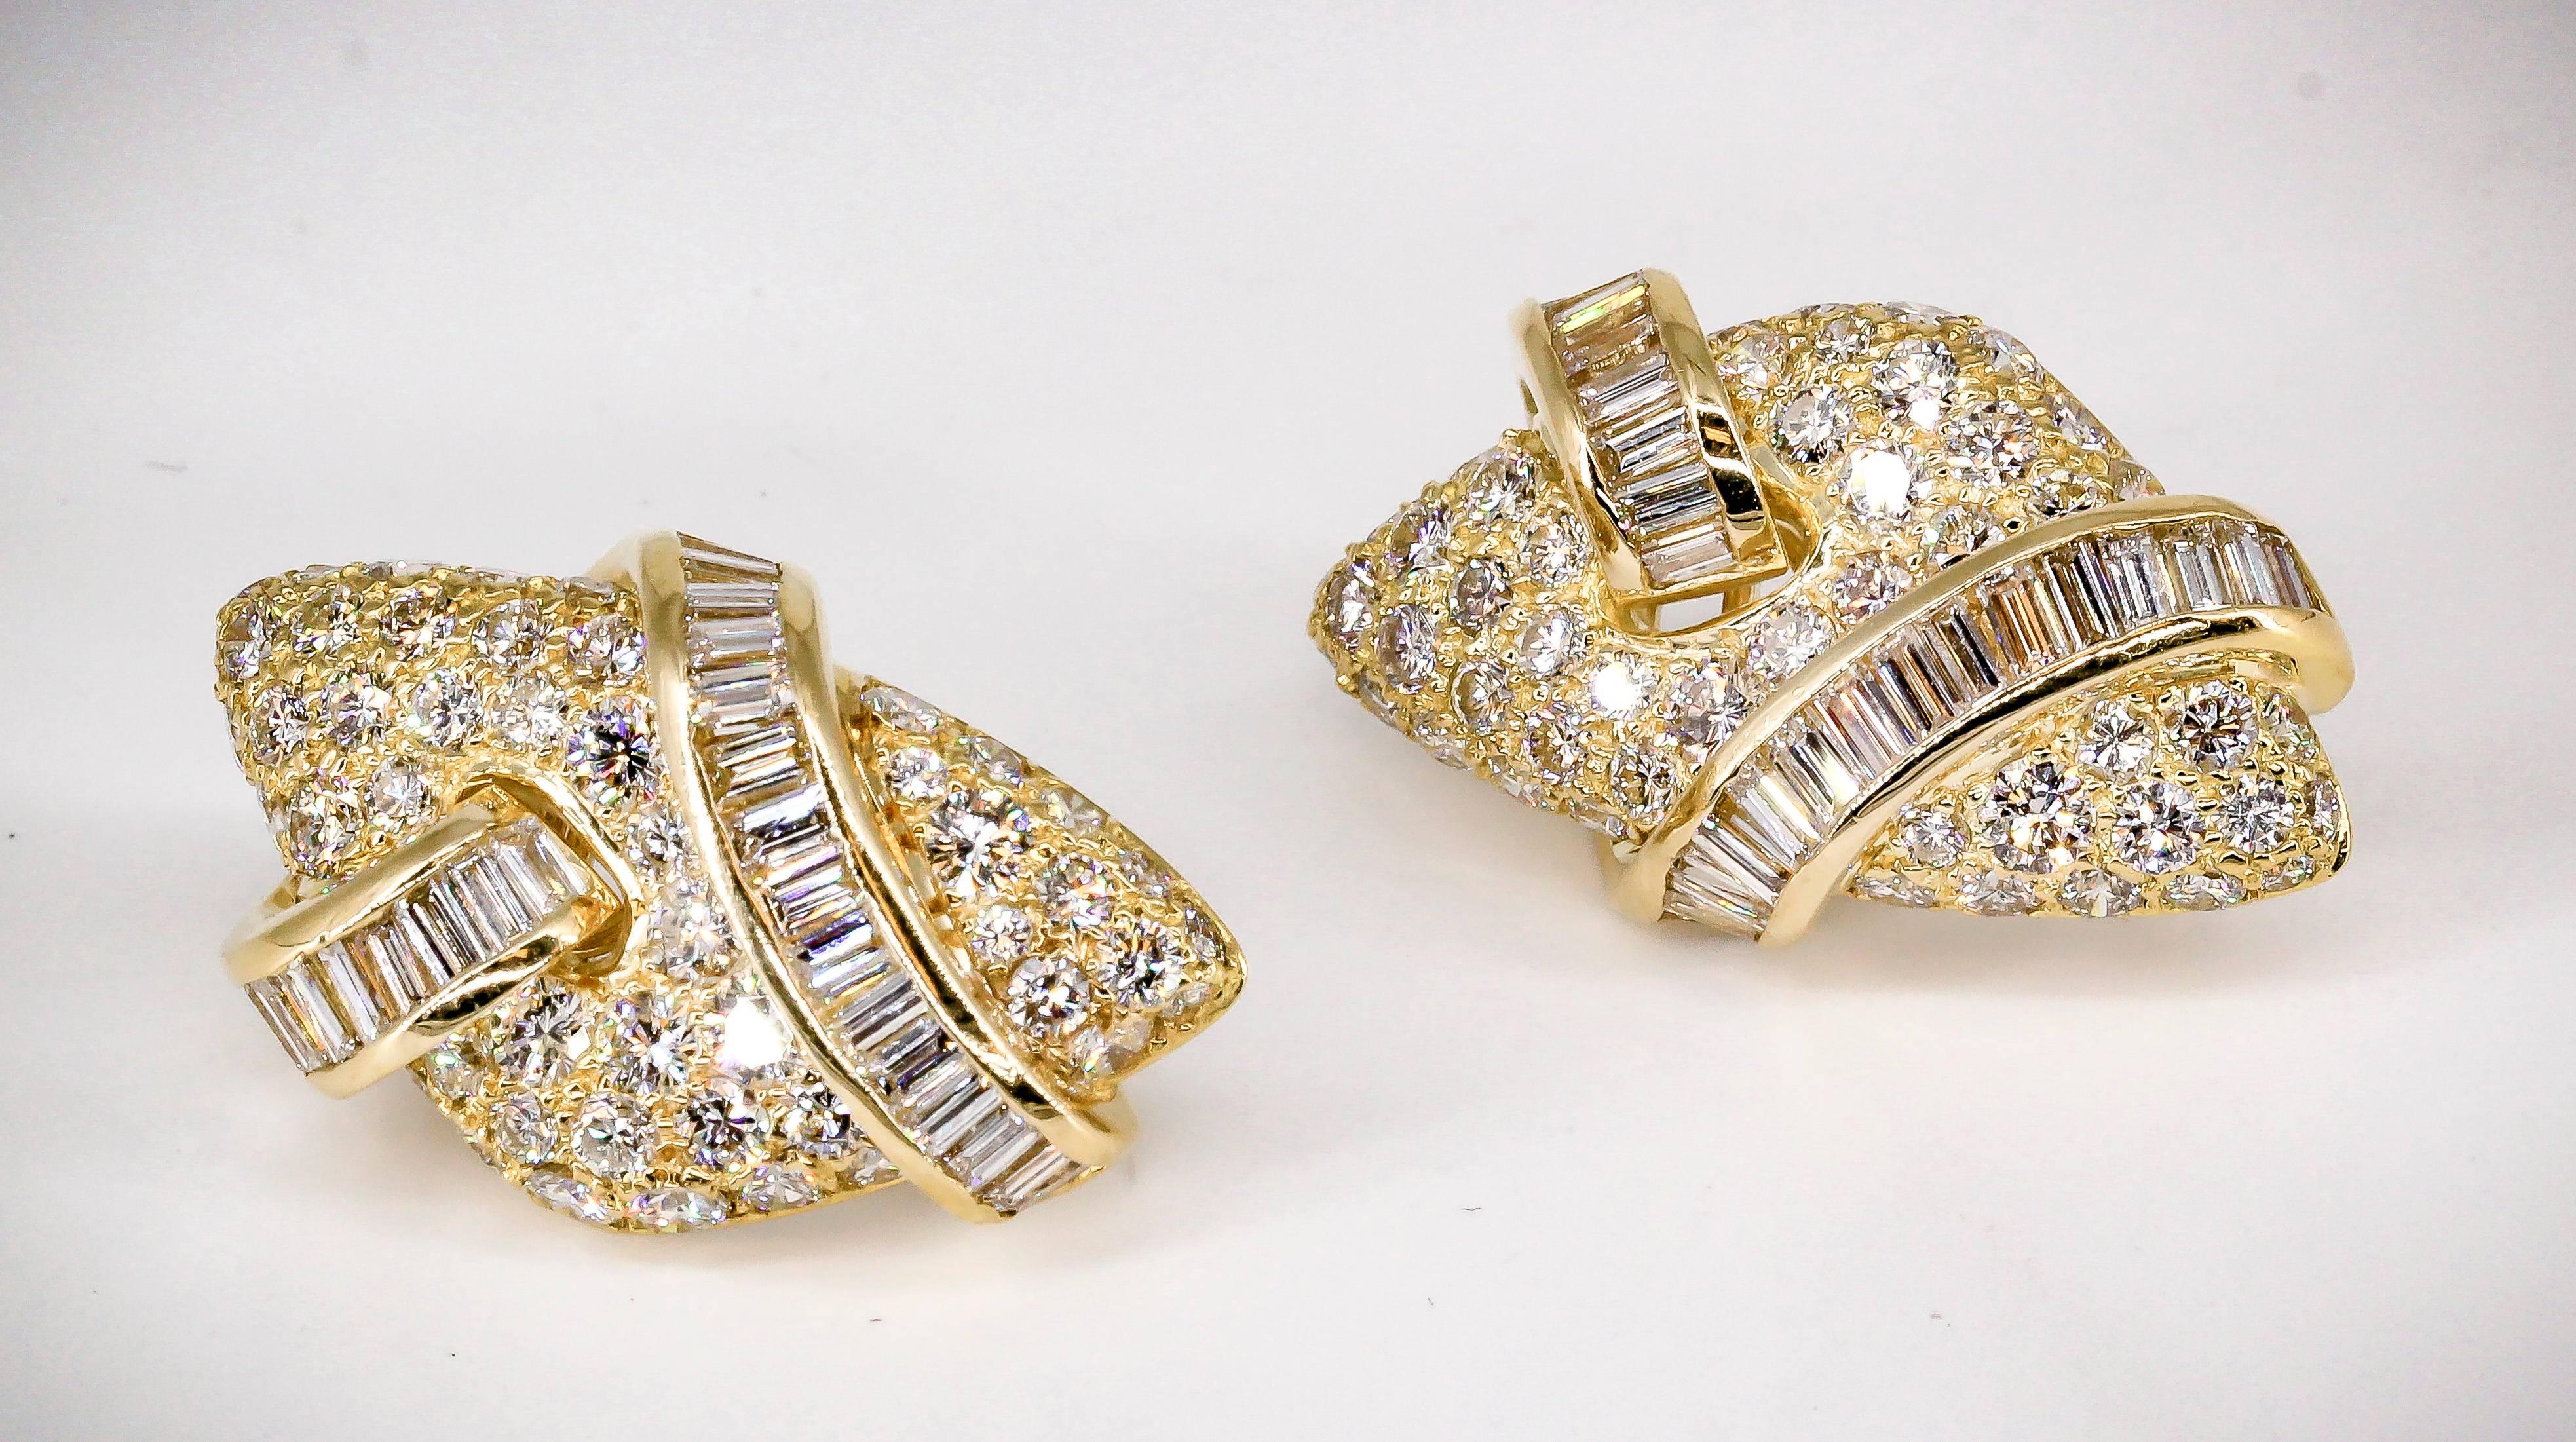 Chic diamond and 18K yellow gold earrings. They feature high grade round and baguette cut diamonds throughout, approx. 7-8 carats total weight. Creative design with the string of baguette cut diamonds going around and through the larger